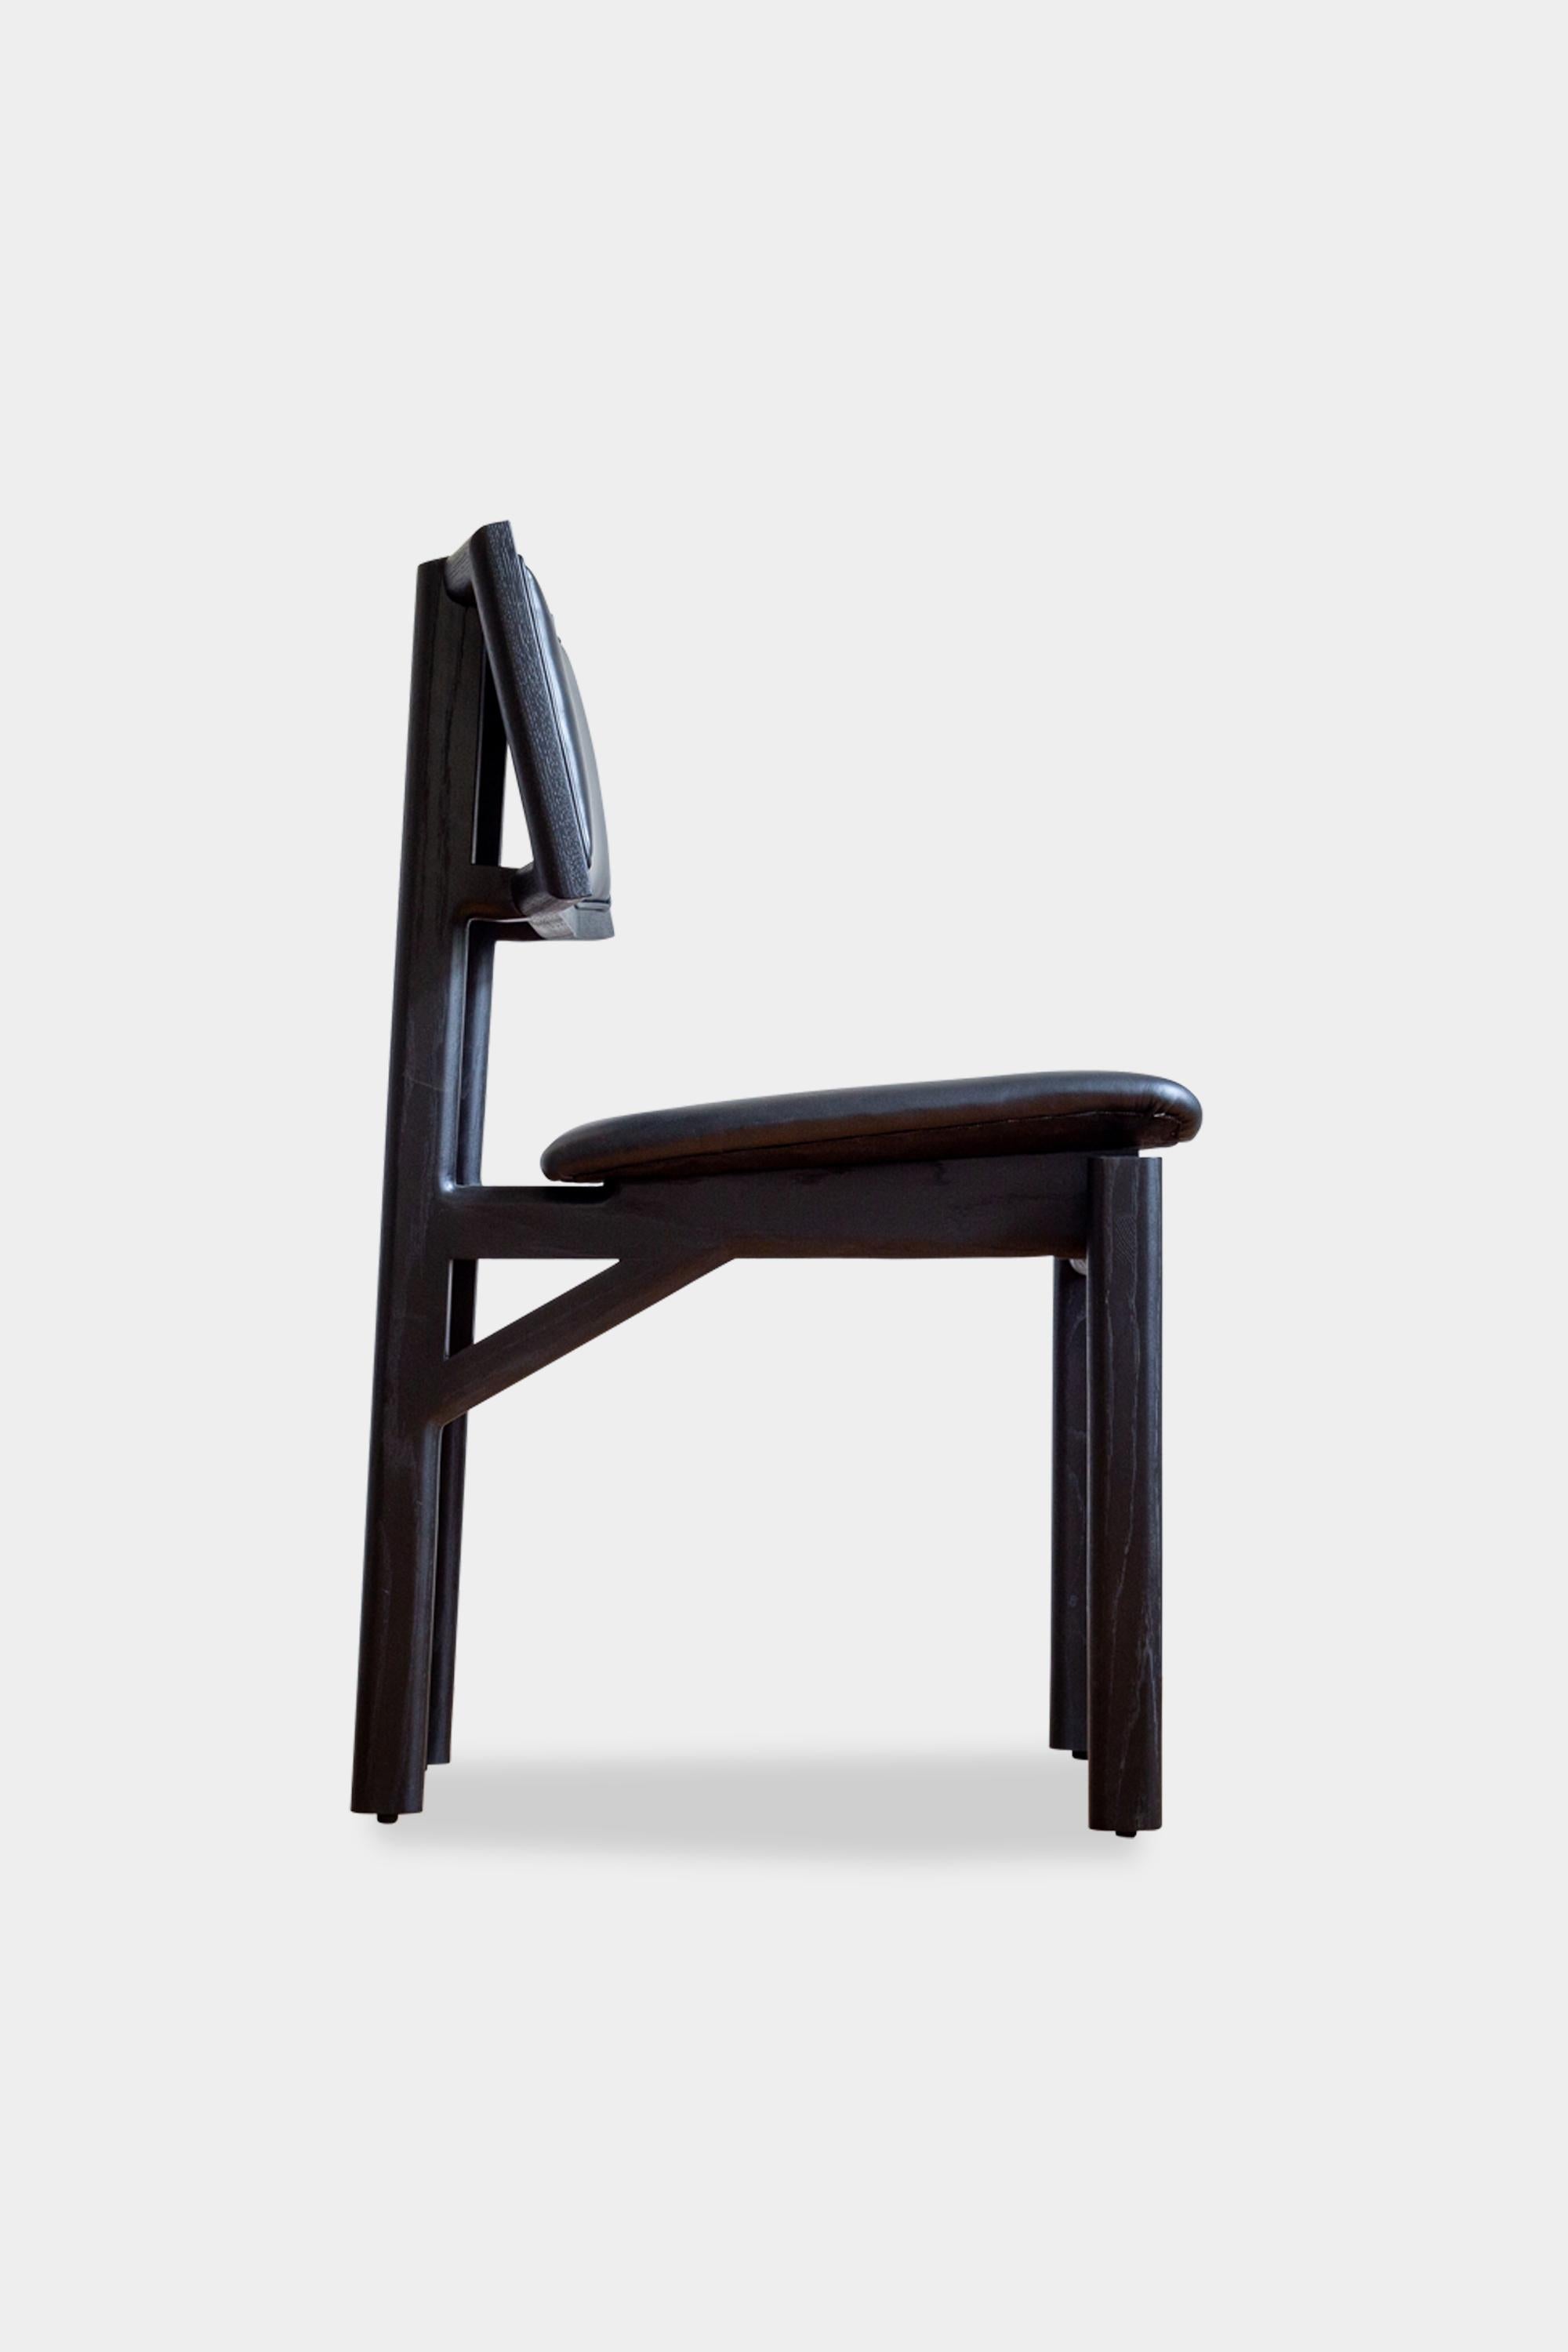 American Handmade Ebonized Oak KUNAI Dining Chair with Black Leather Upholstery For Sale